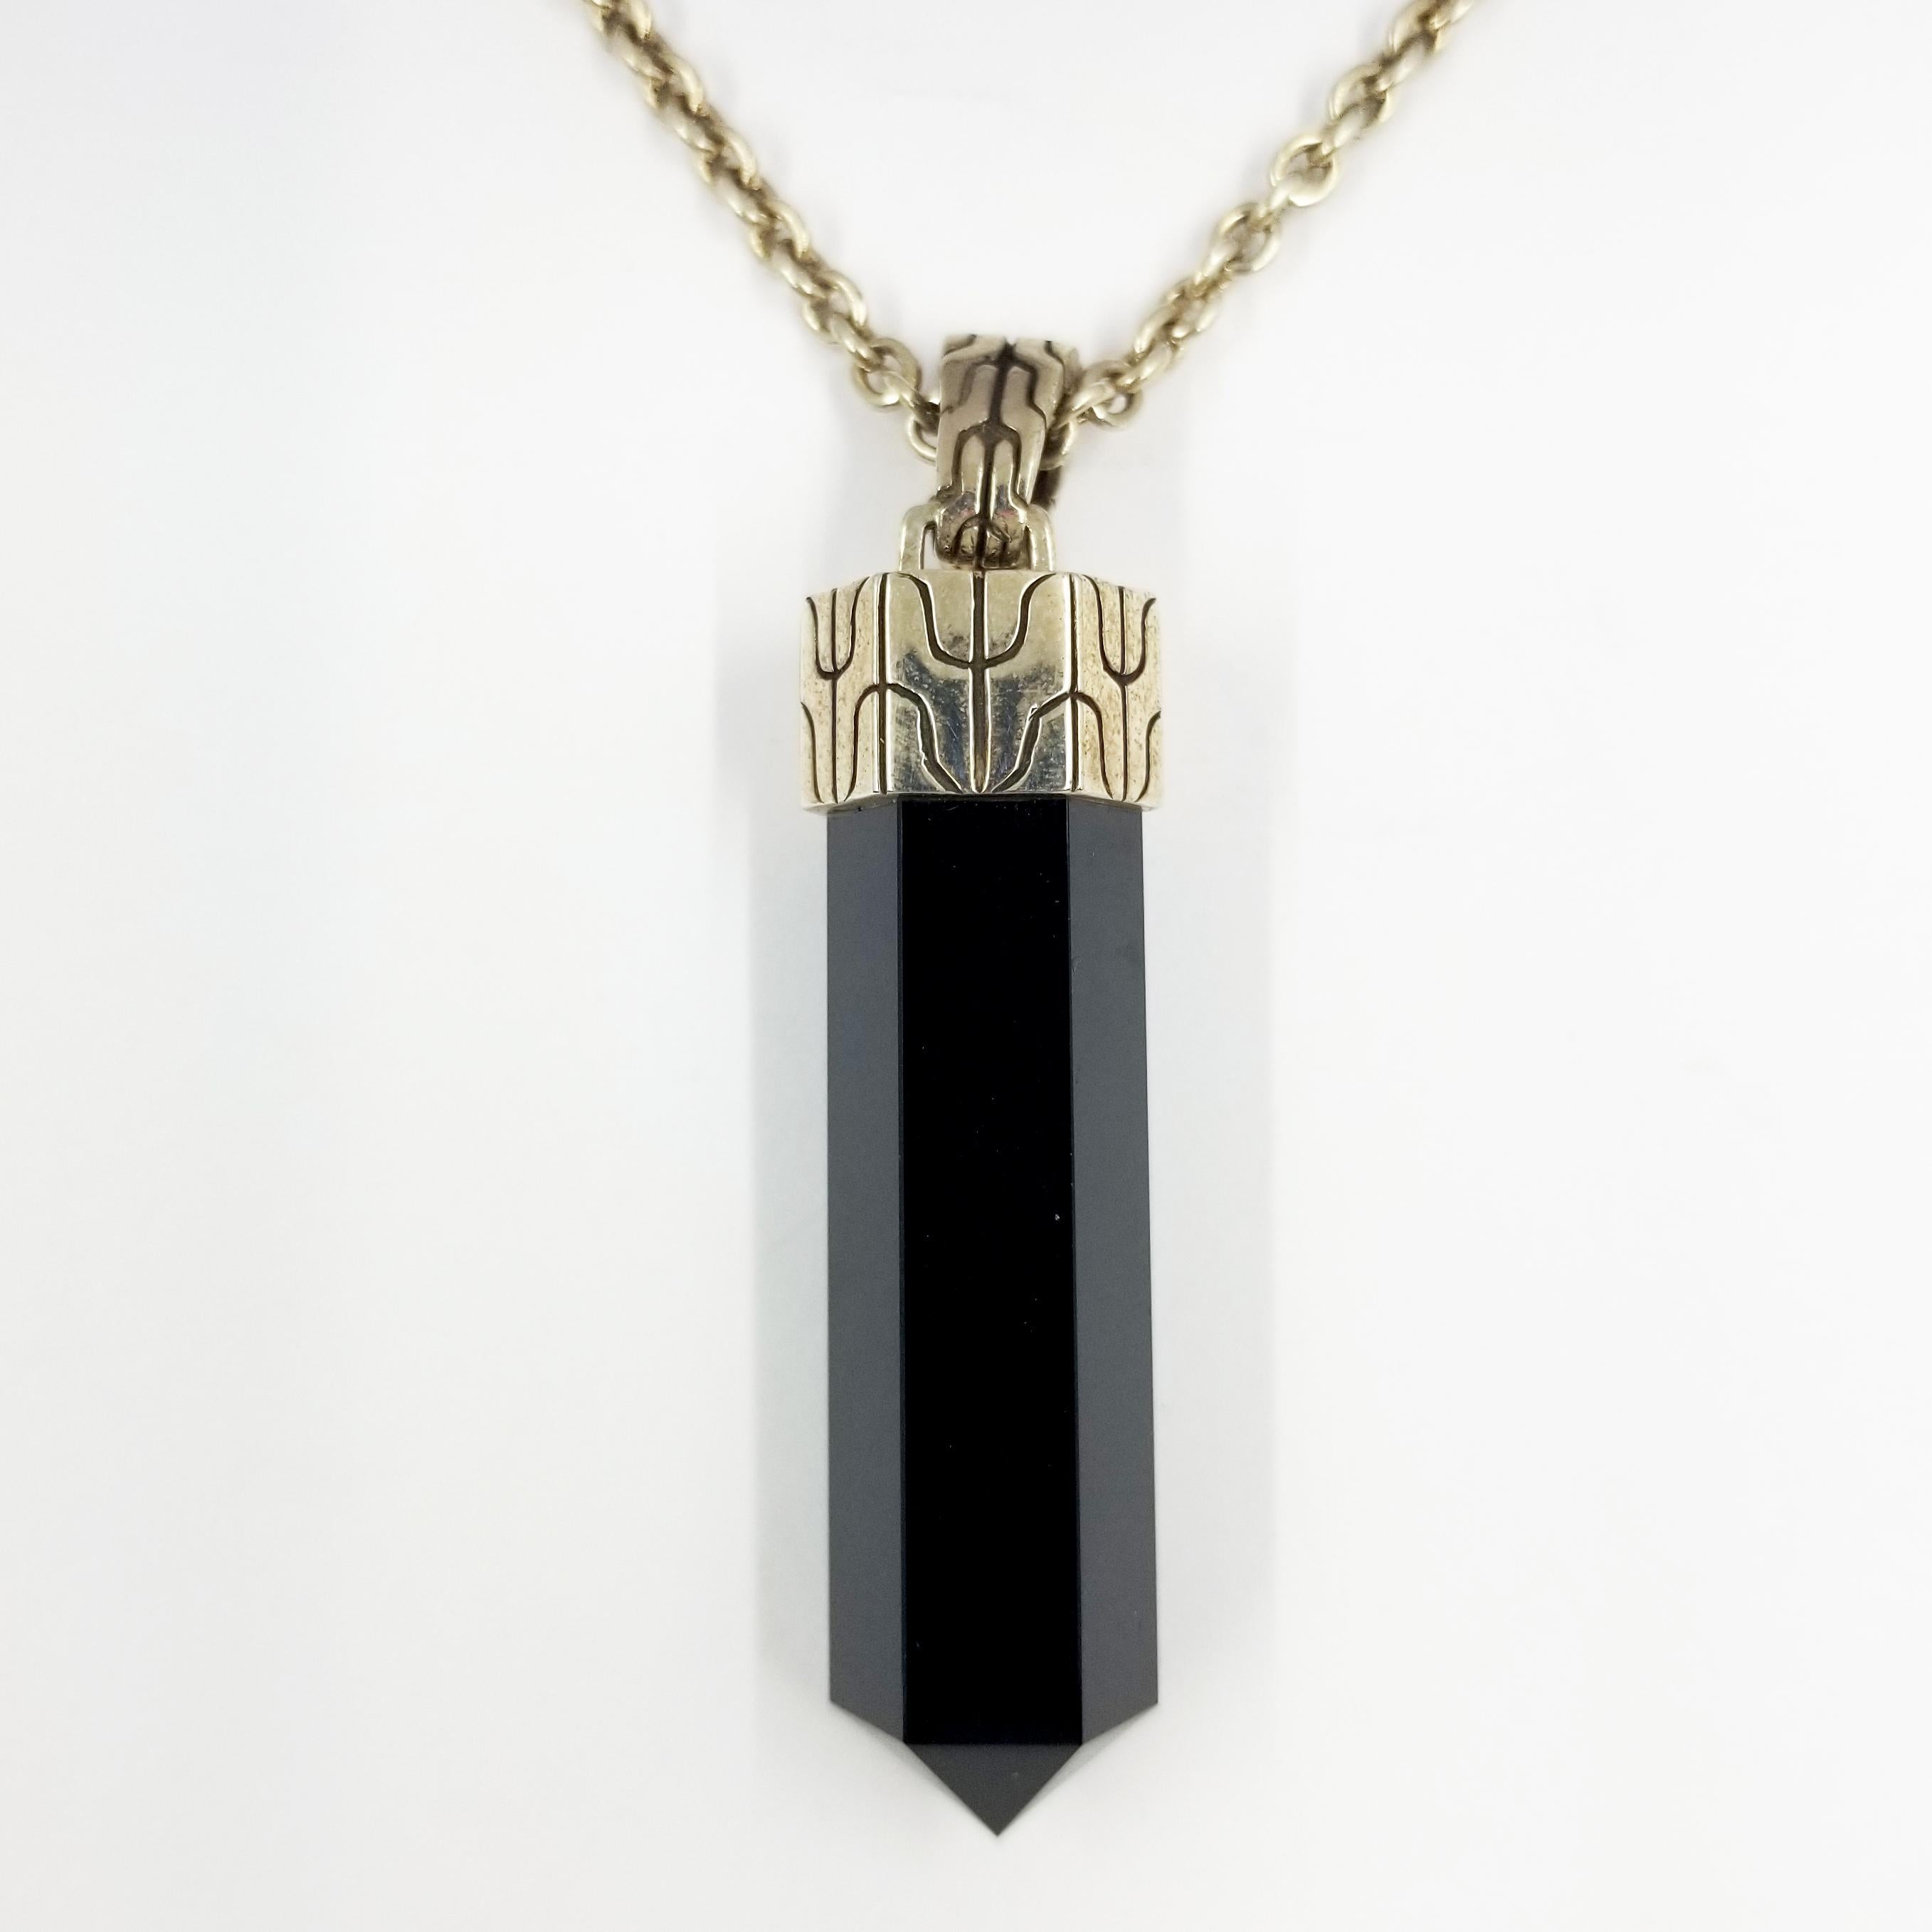 Sterling Silver Necklace with Pendant
Hand Assembled in Bali, Indonesia by John Hardy
Faceted Black Chaceldony Amulet (Onyx)
Classic Chain Design
Stamped JH 925 on Hinged Bale
Comes with John Hardy Pouch & Cleaning Cloth
Style #NBS995031BCLX26